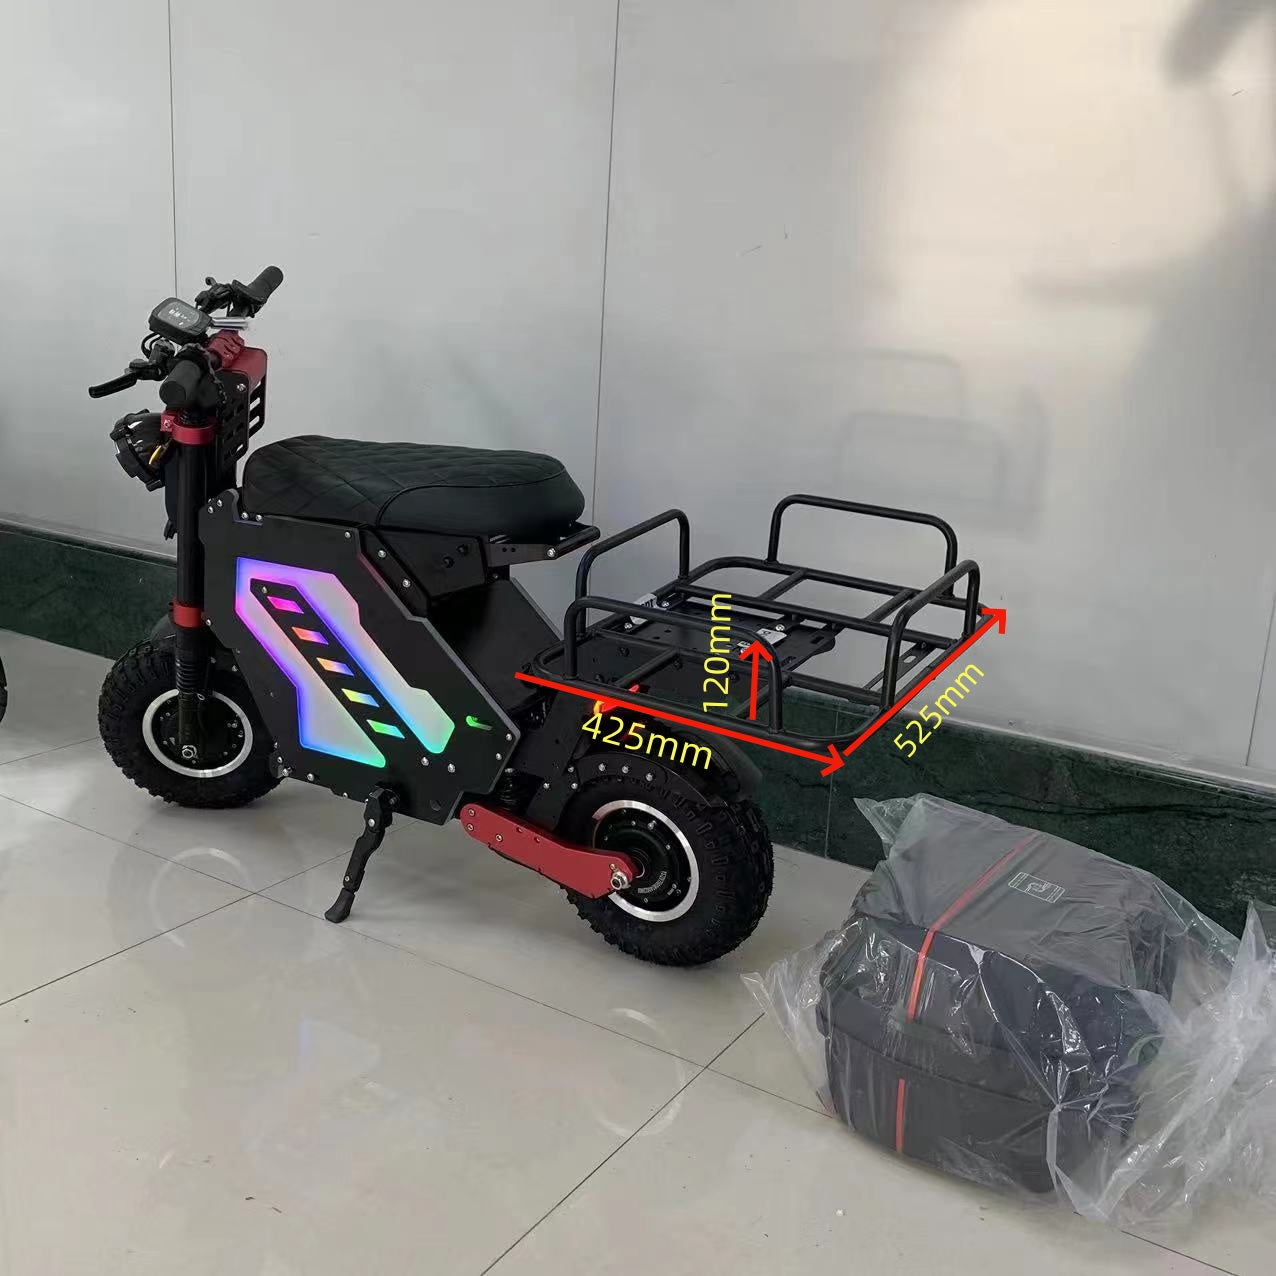 Geofought Molo 5 moped electric scooter Upgraded enlarged rear basket and rack